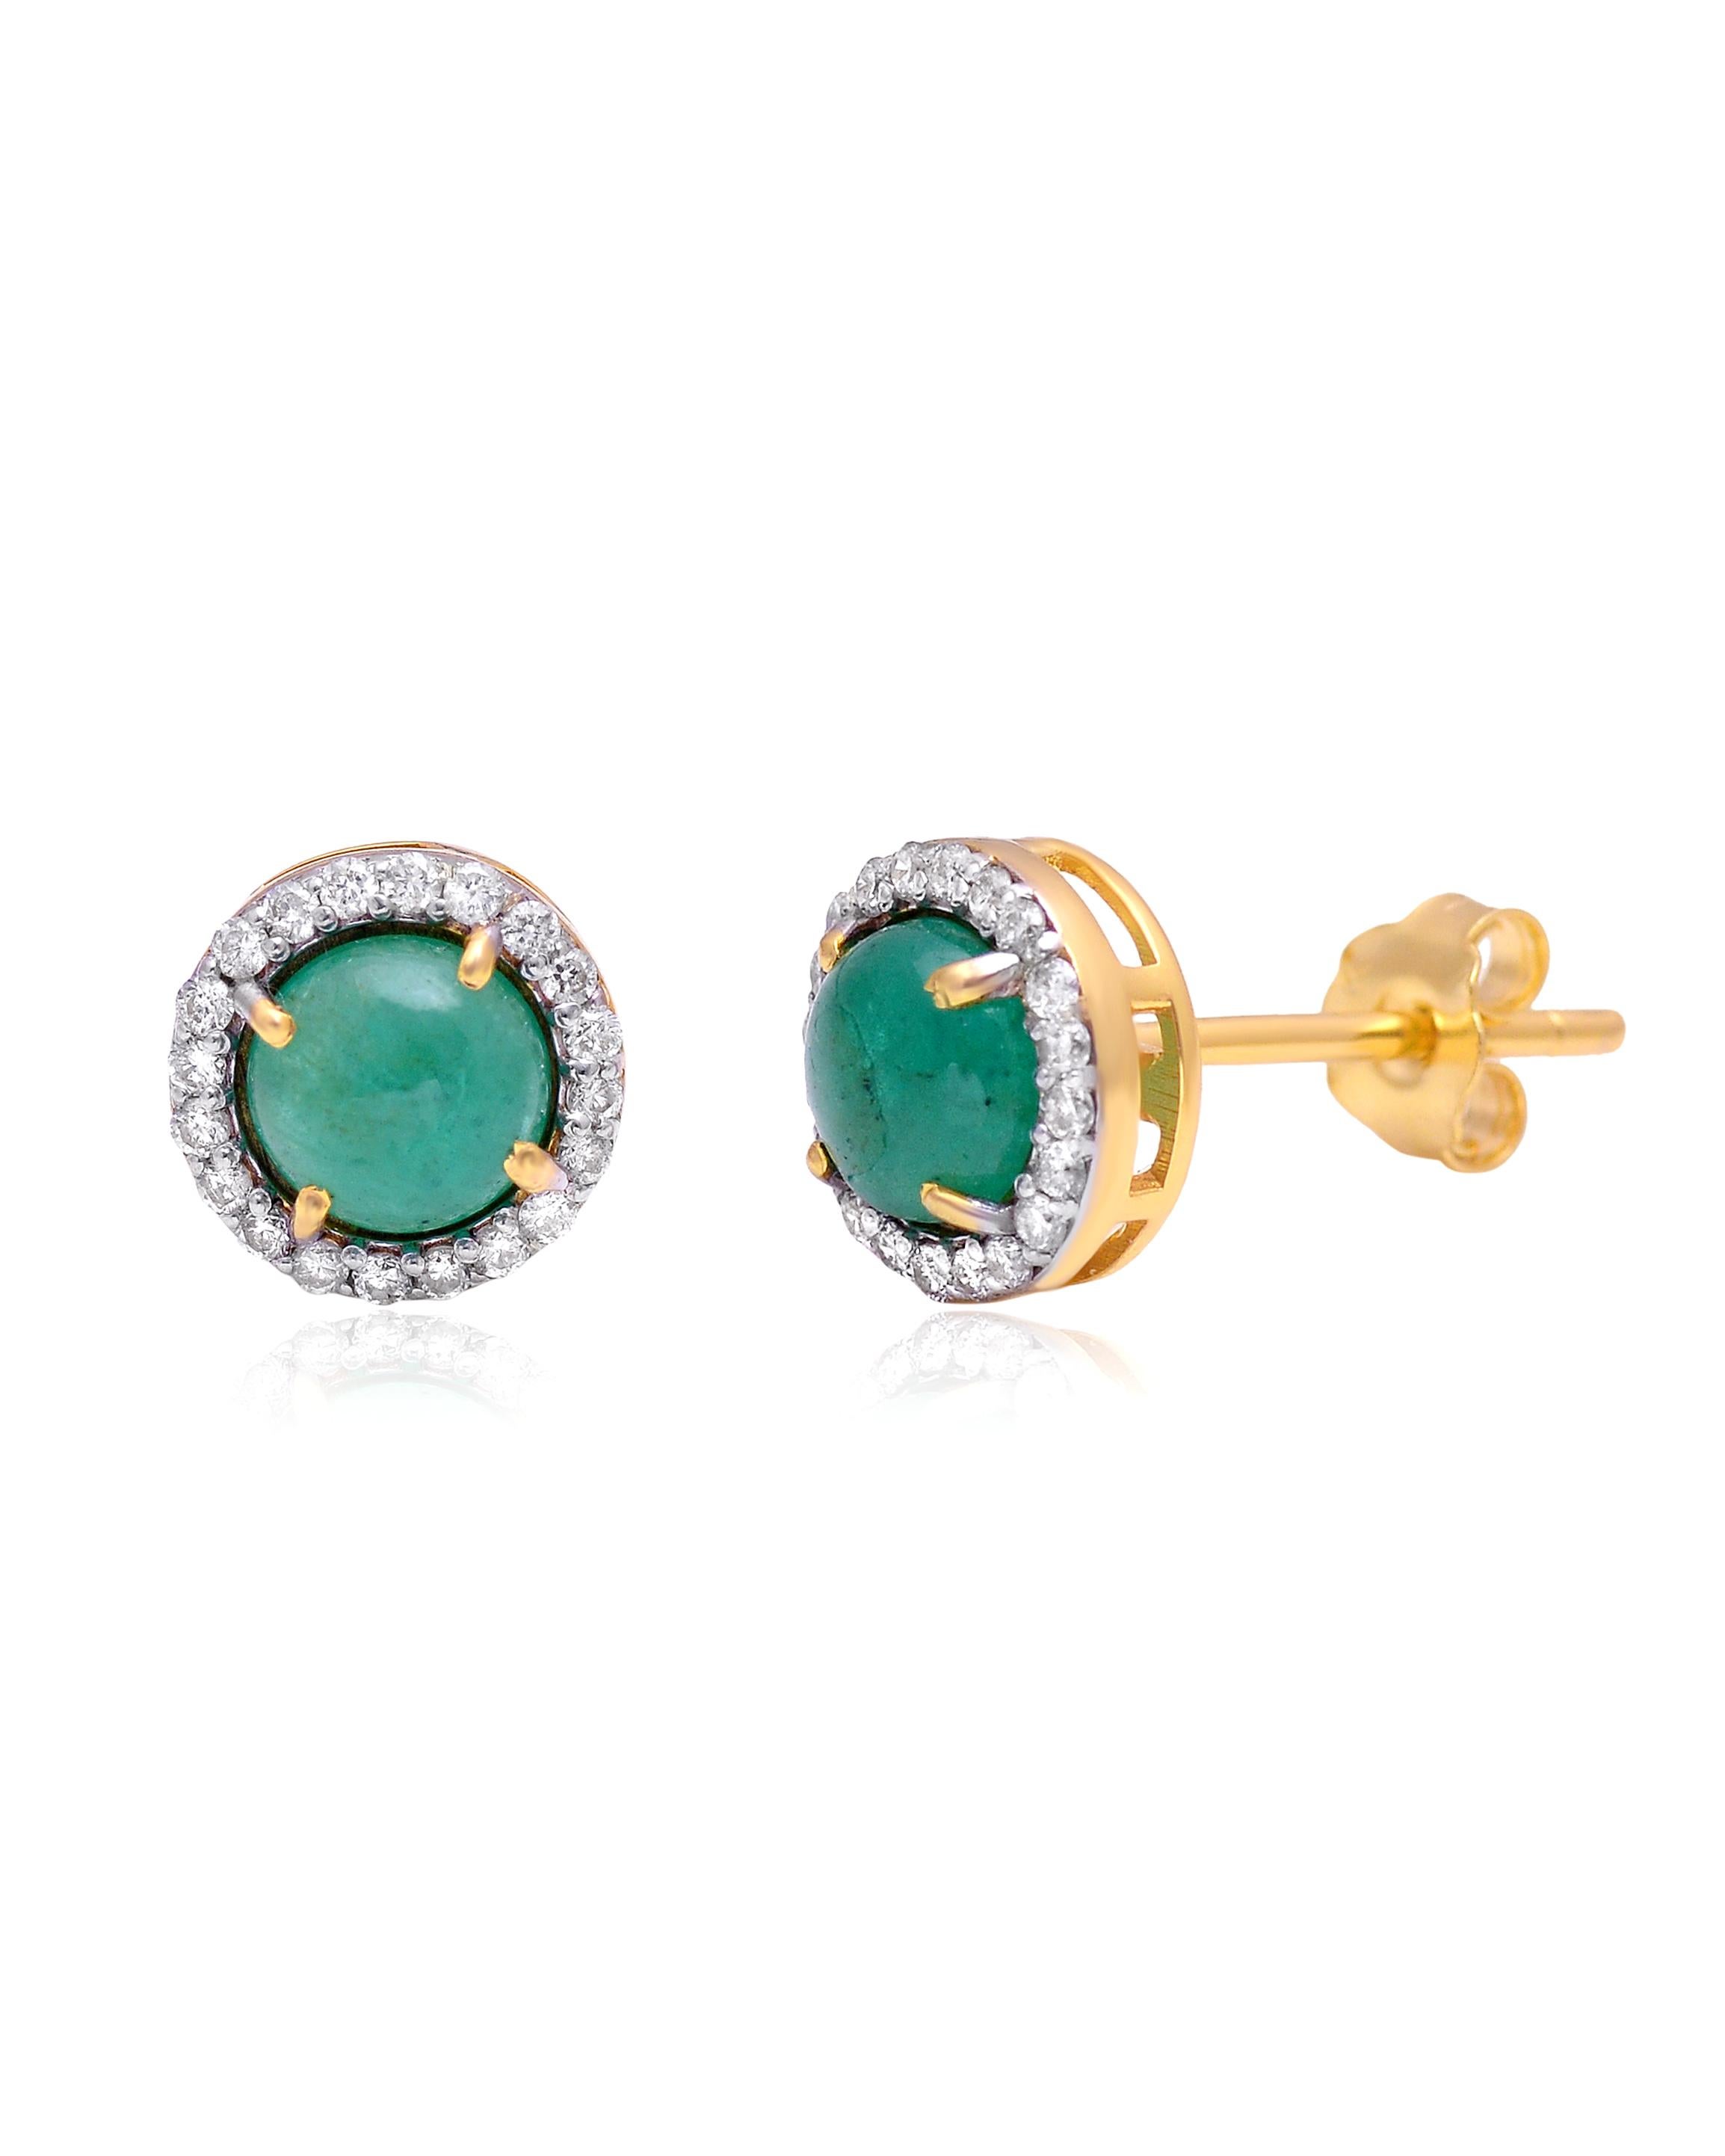 Stud earrings for running everyday errands and better! Thoughtfully made with 14K Solid Yellow Gold, 0.24 Carat Natural Diamond (G-H Color, SI1-SI2 Purity)  and Emerald Gemstone! Pair these up with our Emerald necklace and ring for that finished